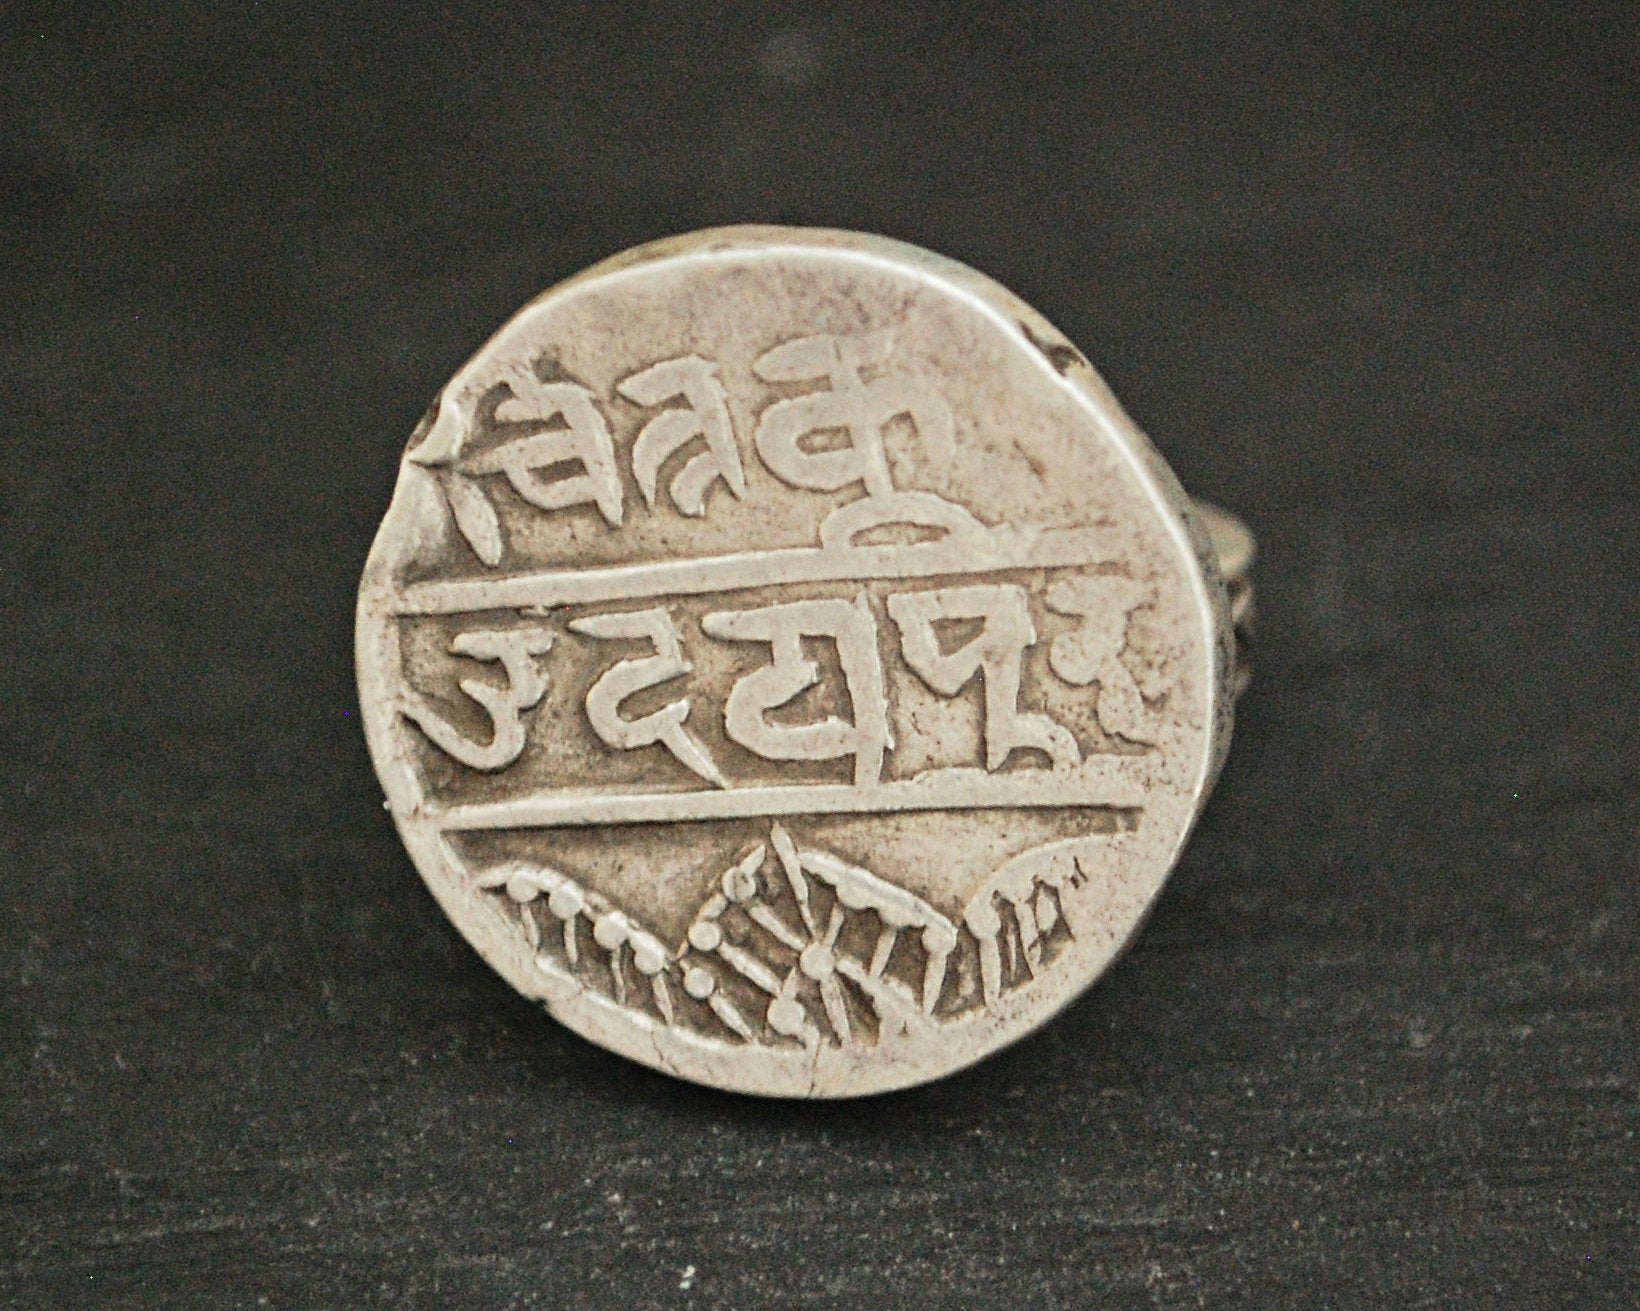 Indian Coin Ring with Writing - Size 7.5